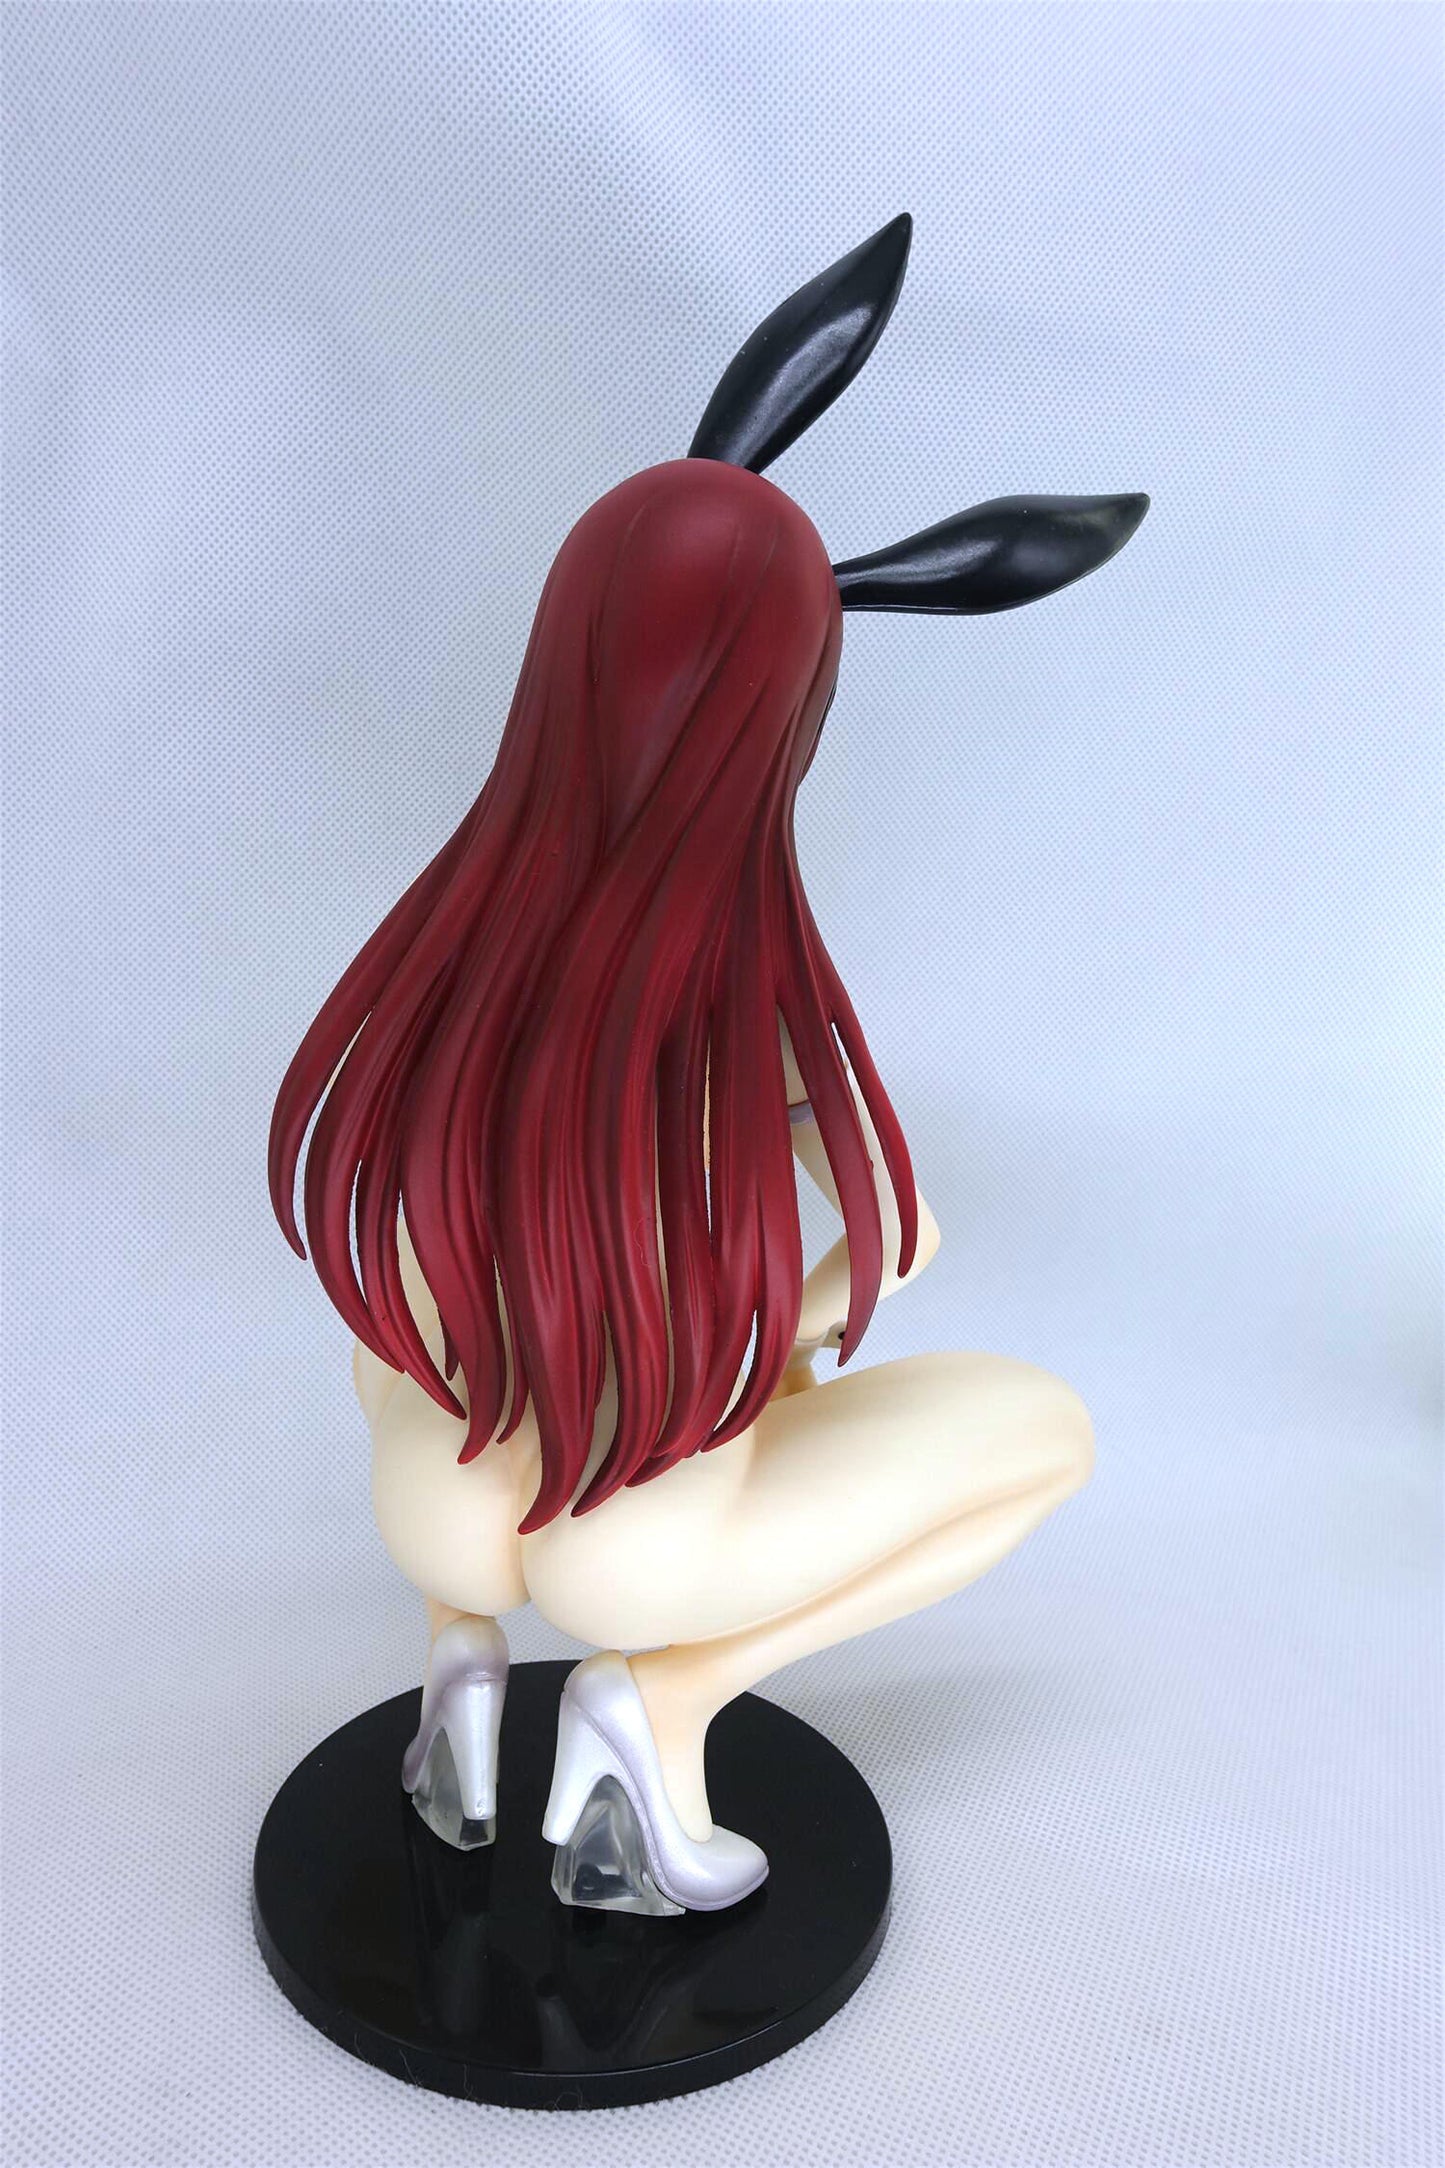 Fairy Tail - Erza Scarlet huge breast Ver. 1/4 naked anime figure